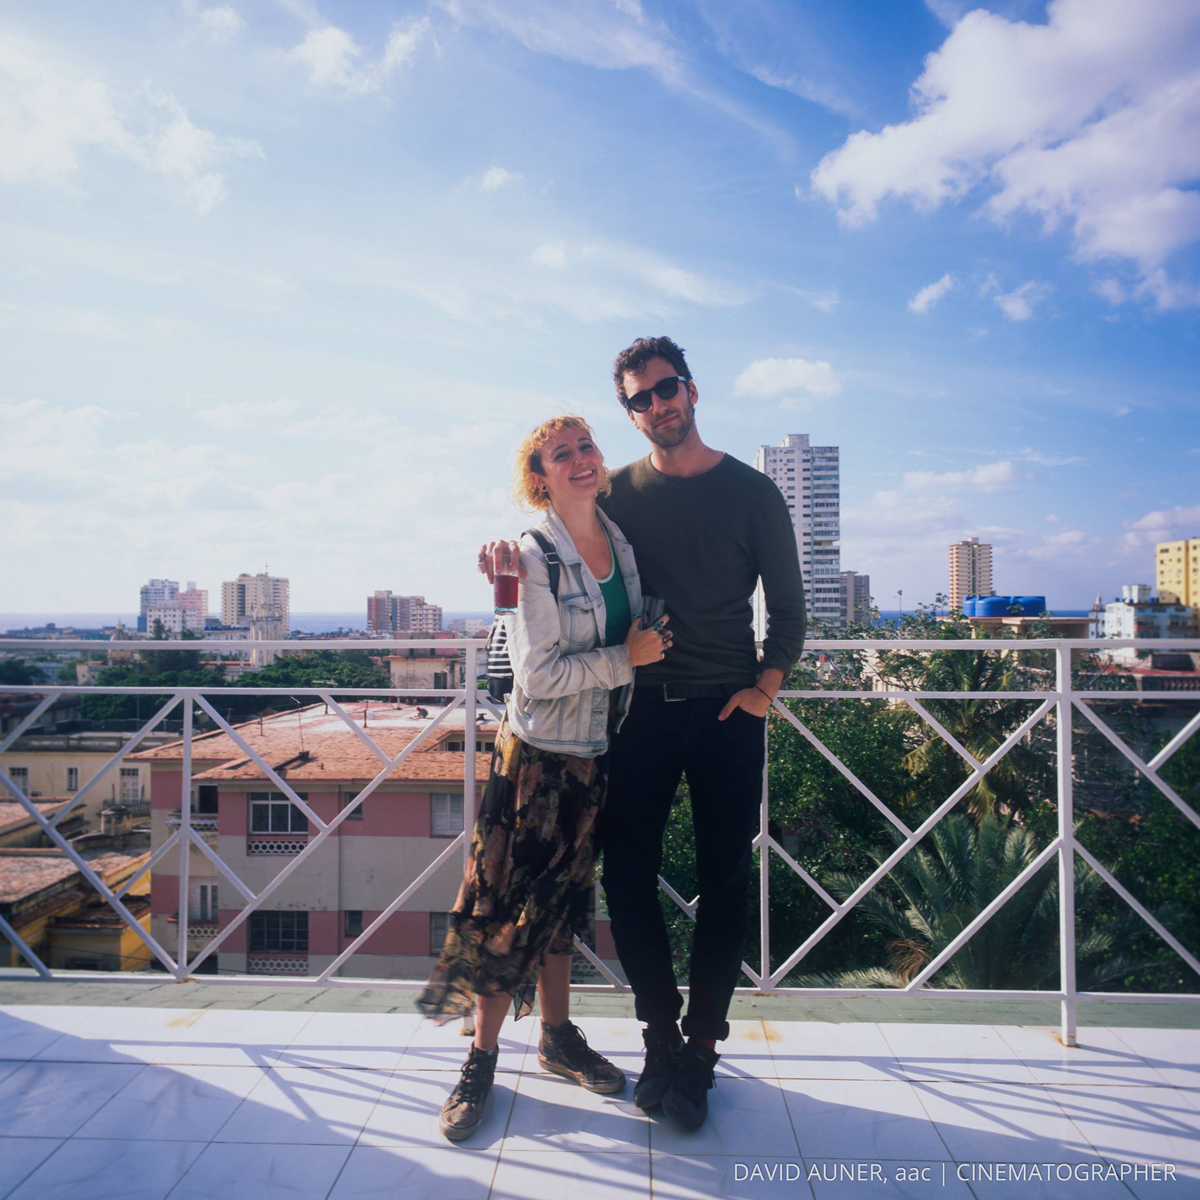 Kylie Shaffer and Charlie Cole standing together on a rooftop balcony with a big blue sky and buildings and trees behind them.